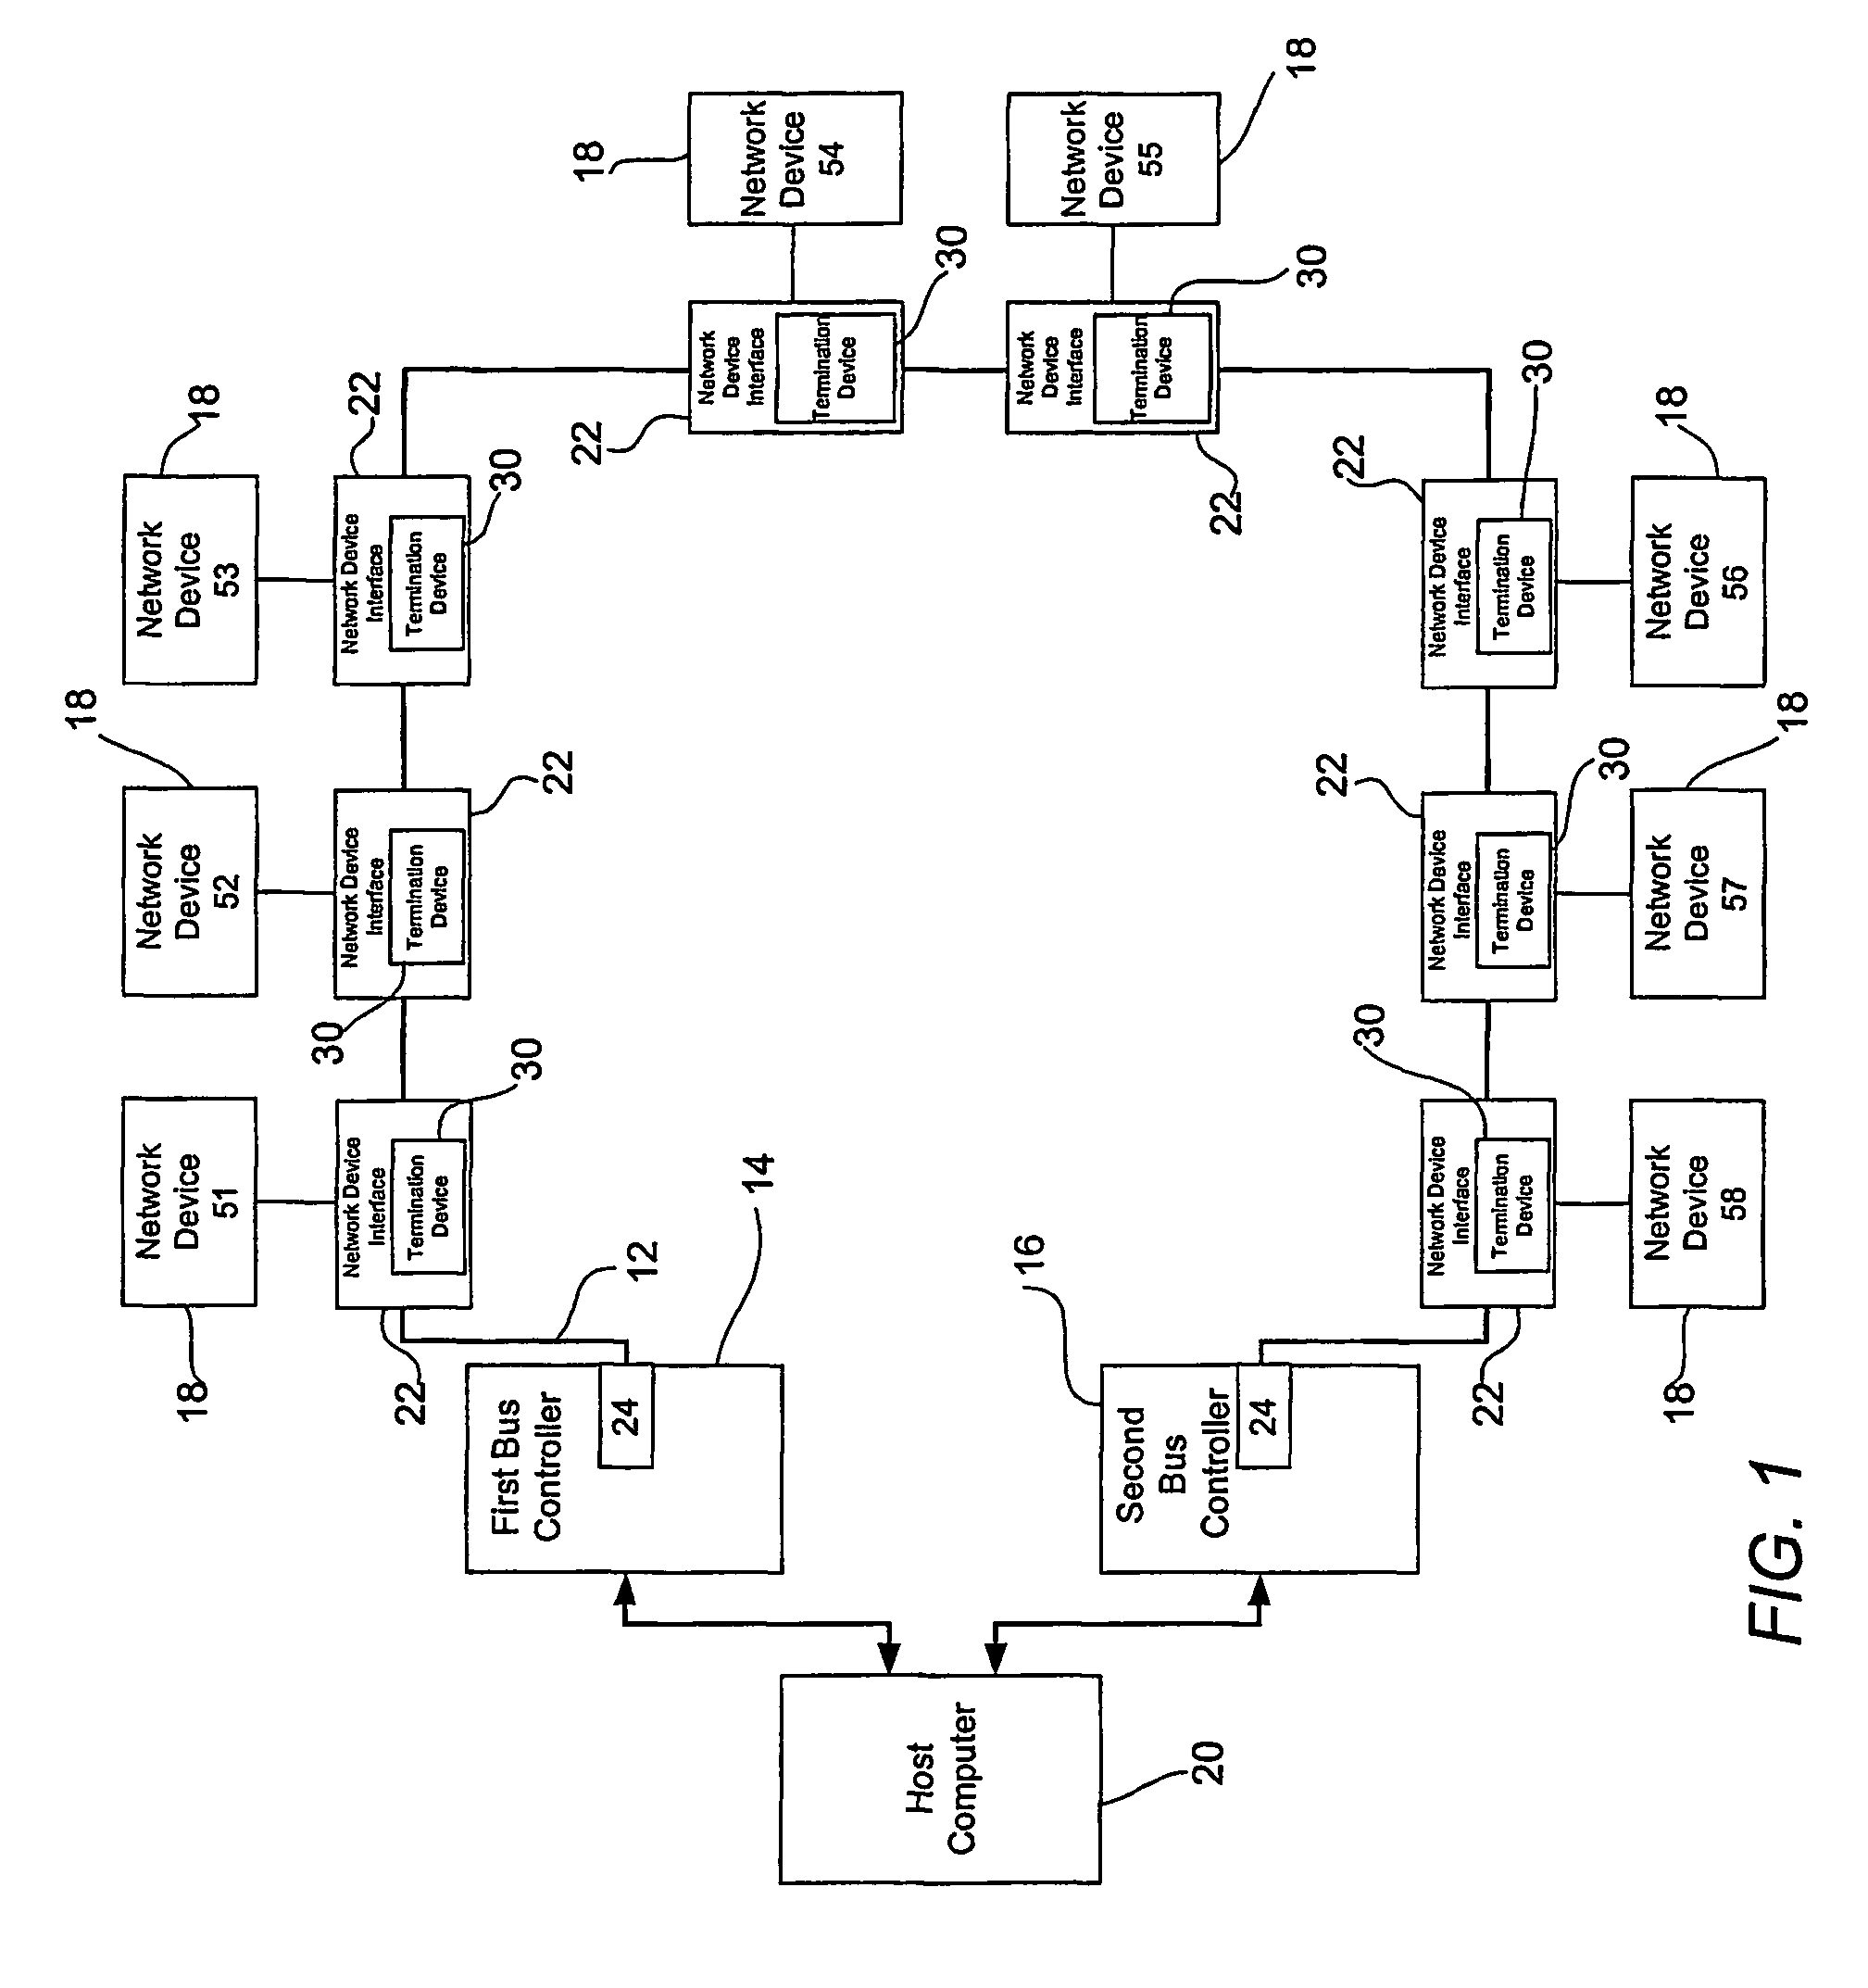 Systems and methods for maintaining network stability